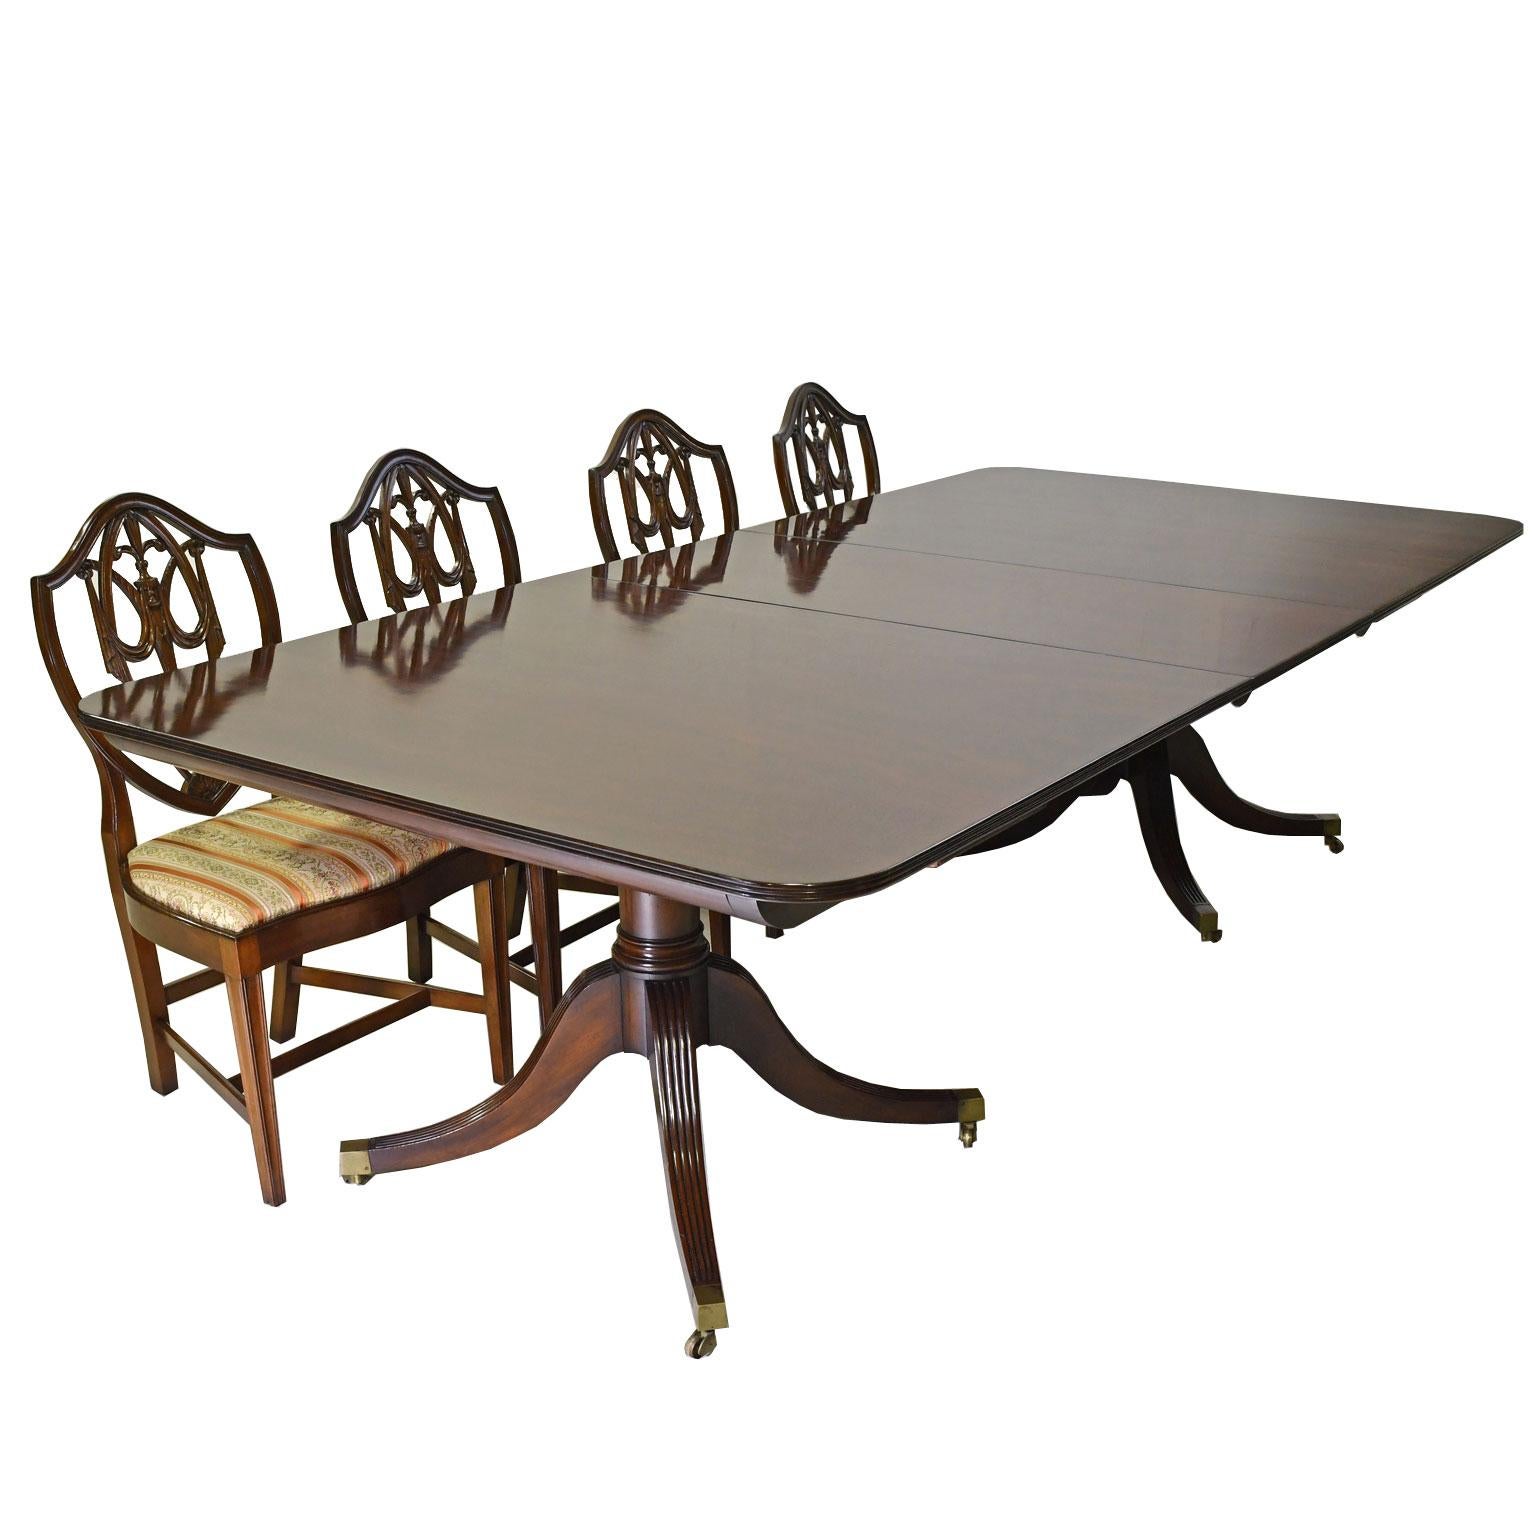 12' Hepplewhite-Style Dining Table Mahogany, 2 Pedestals, 3 Leaves, circa 1945 6